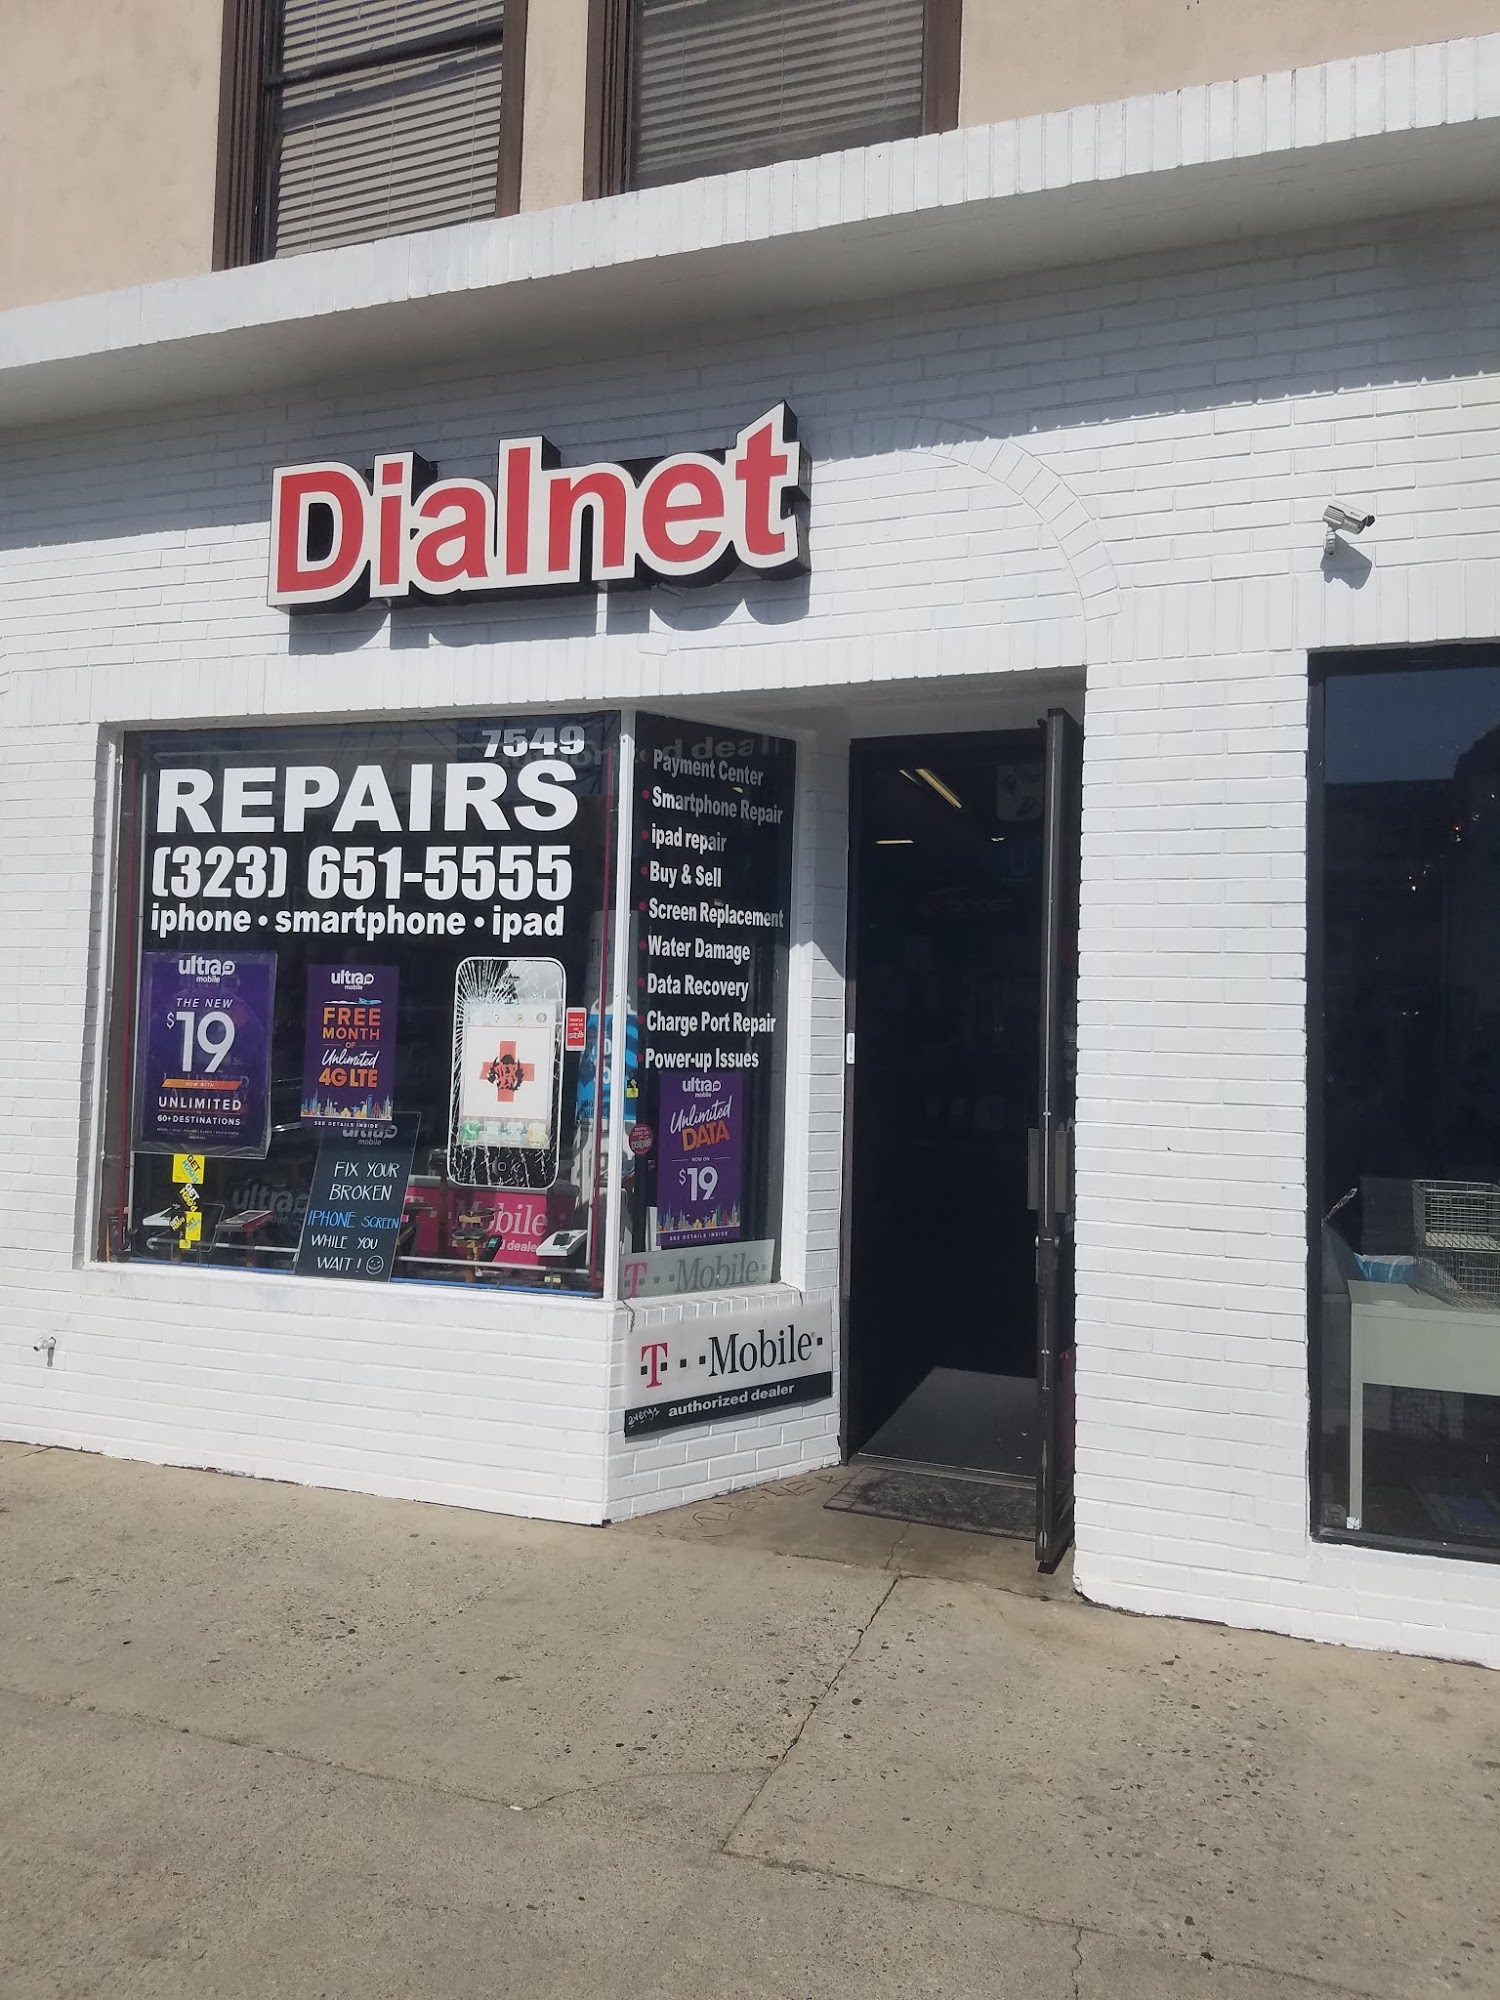 Dialnet - iPhone and Smartphone Repair on Melrose